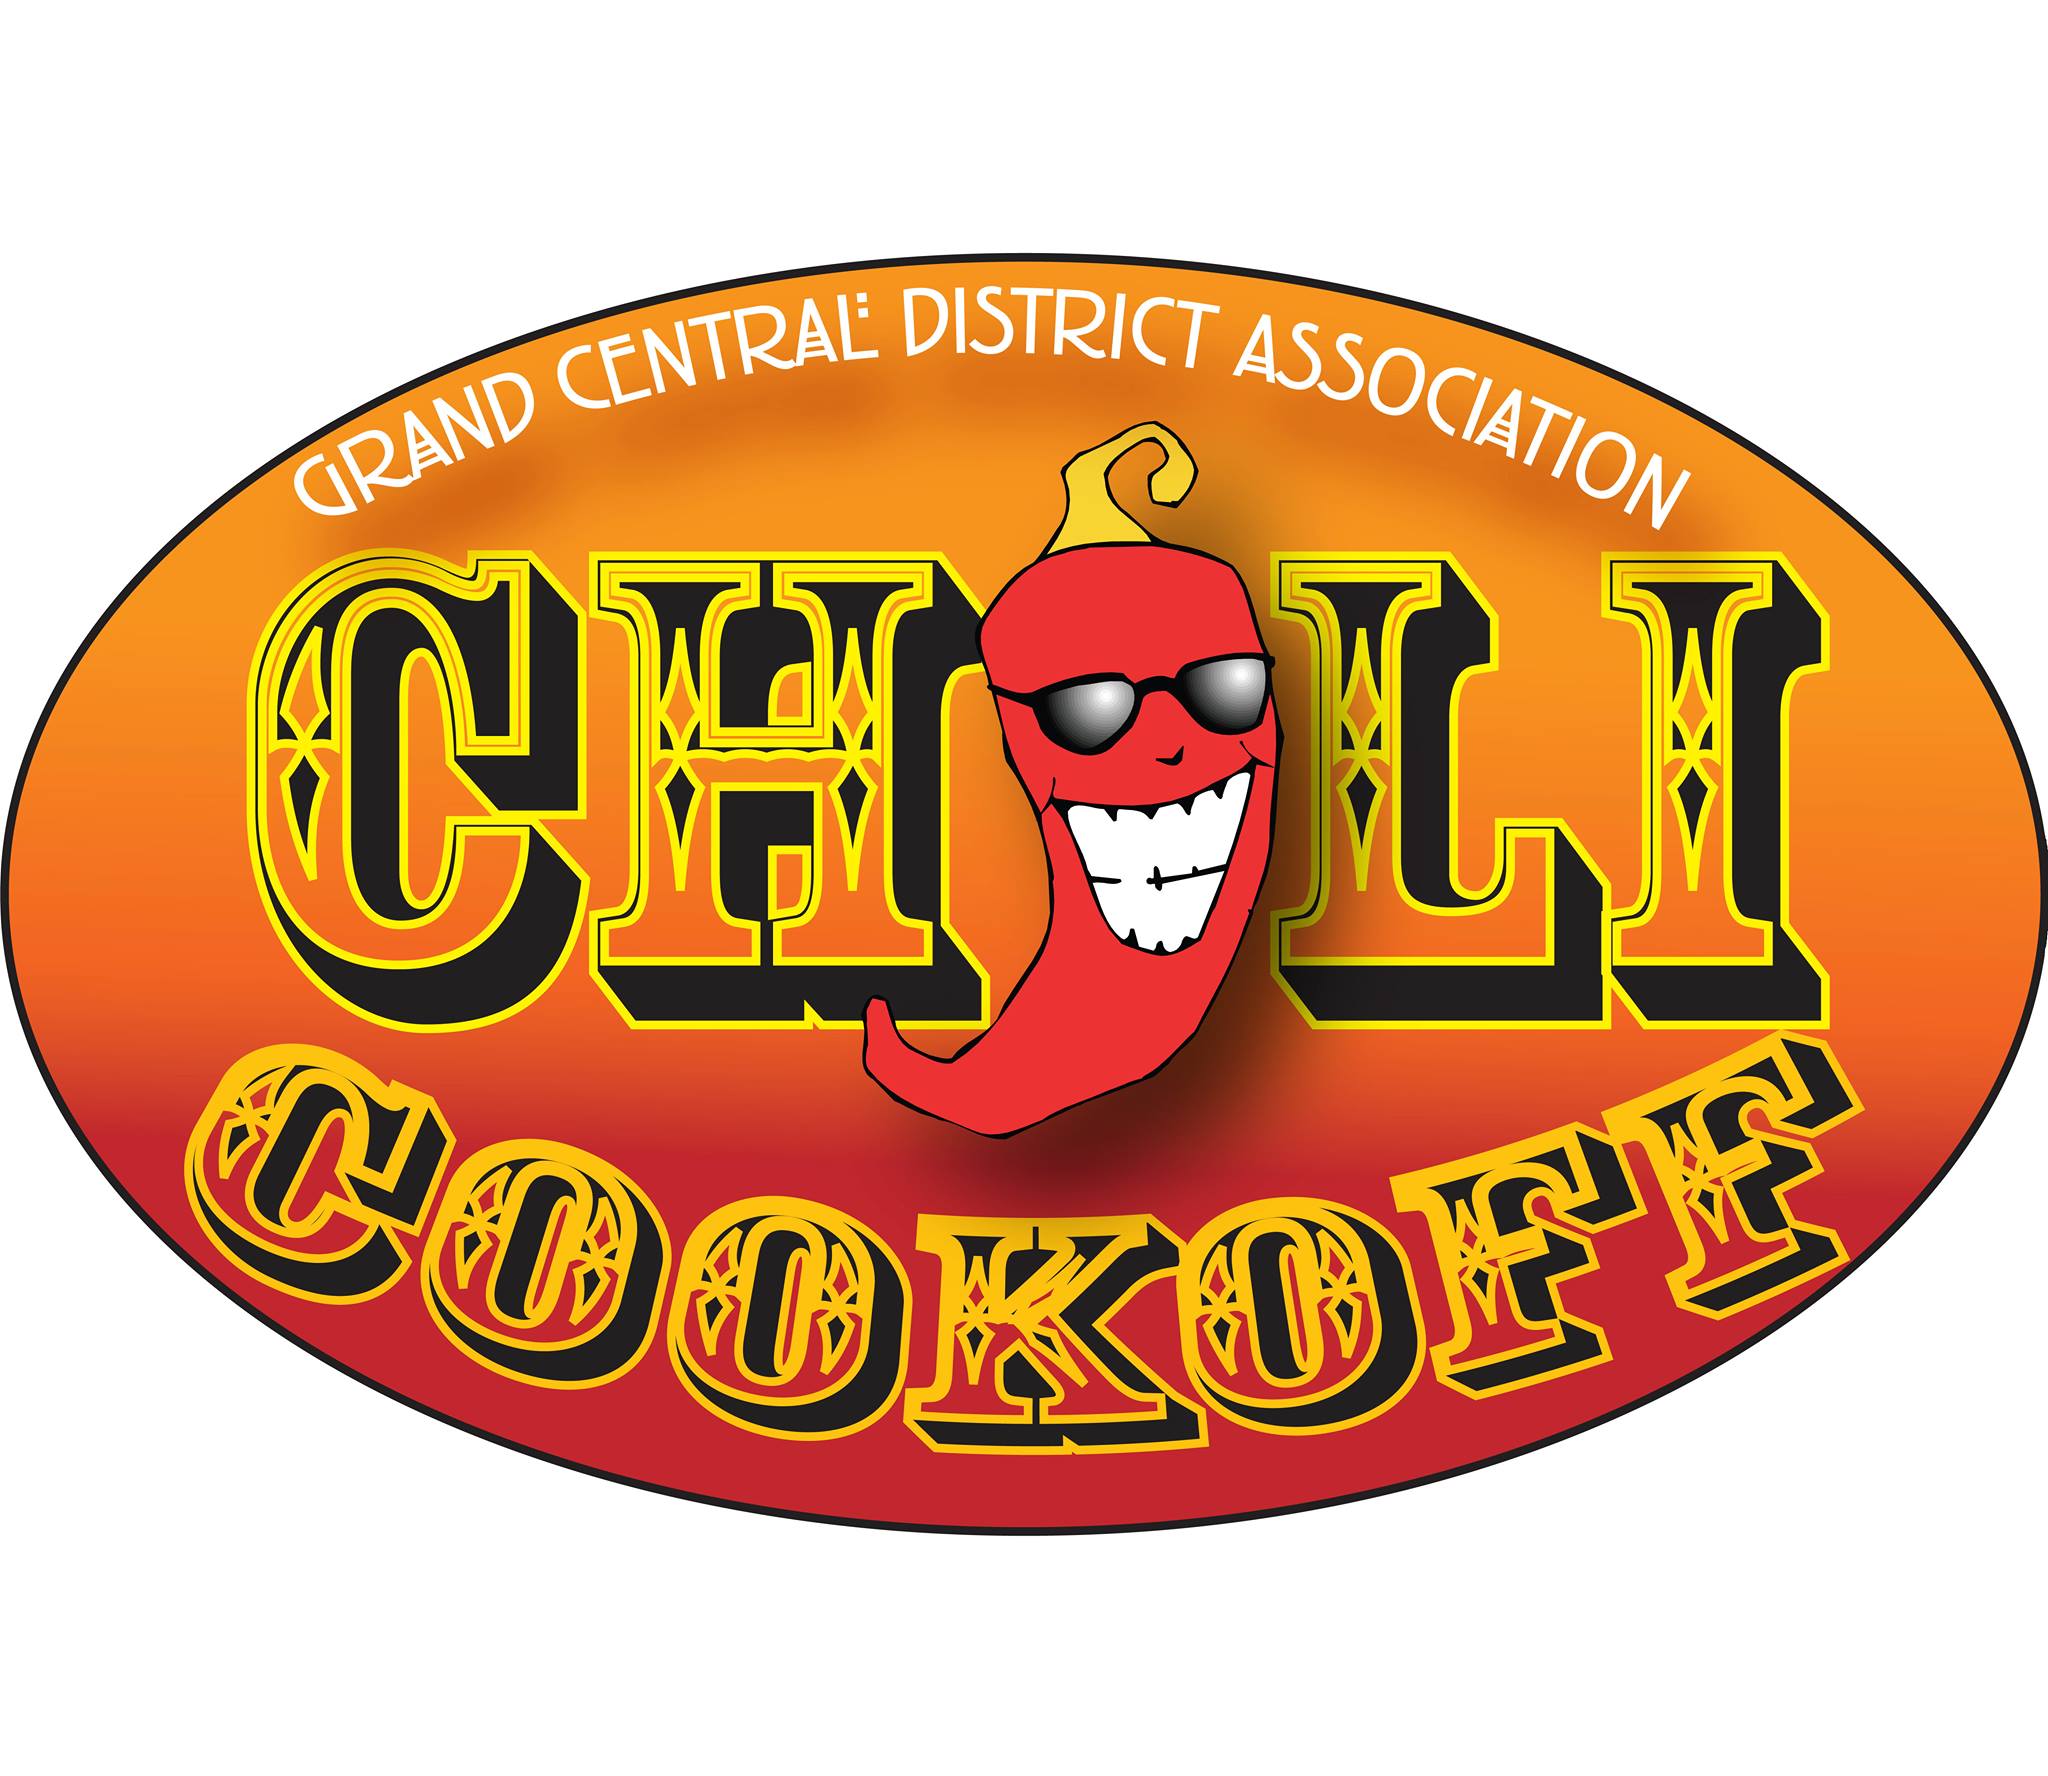 St. Petersburg Foodies Appointed Judges for Chili Cook-Off